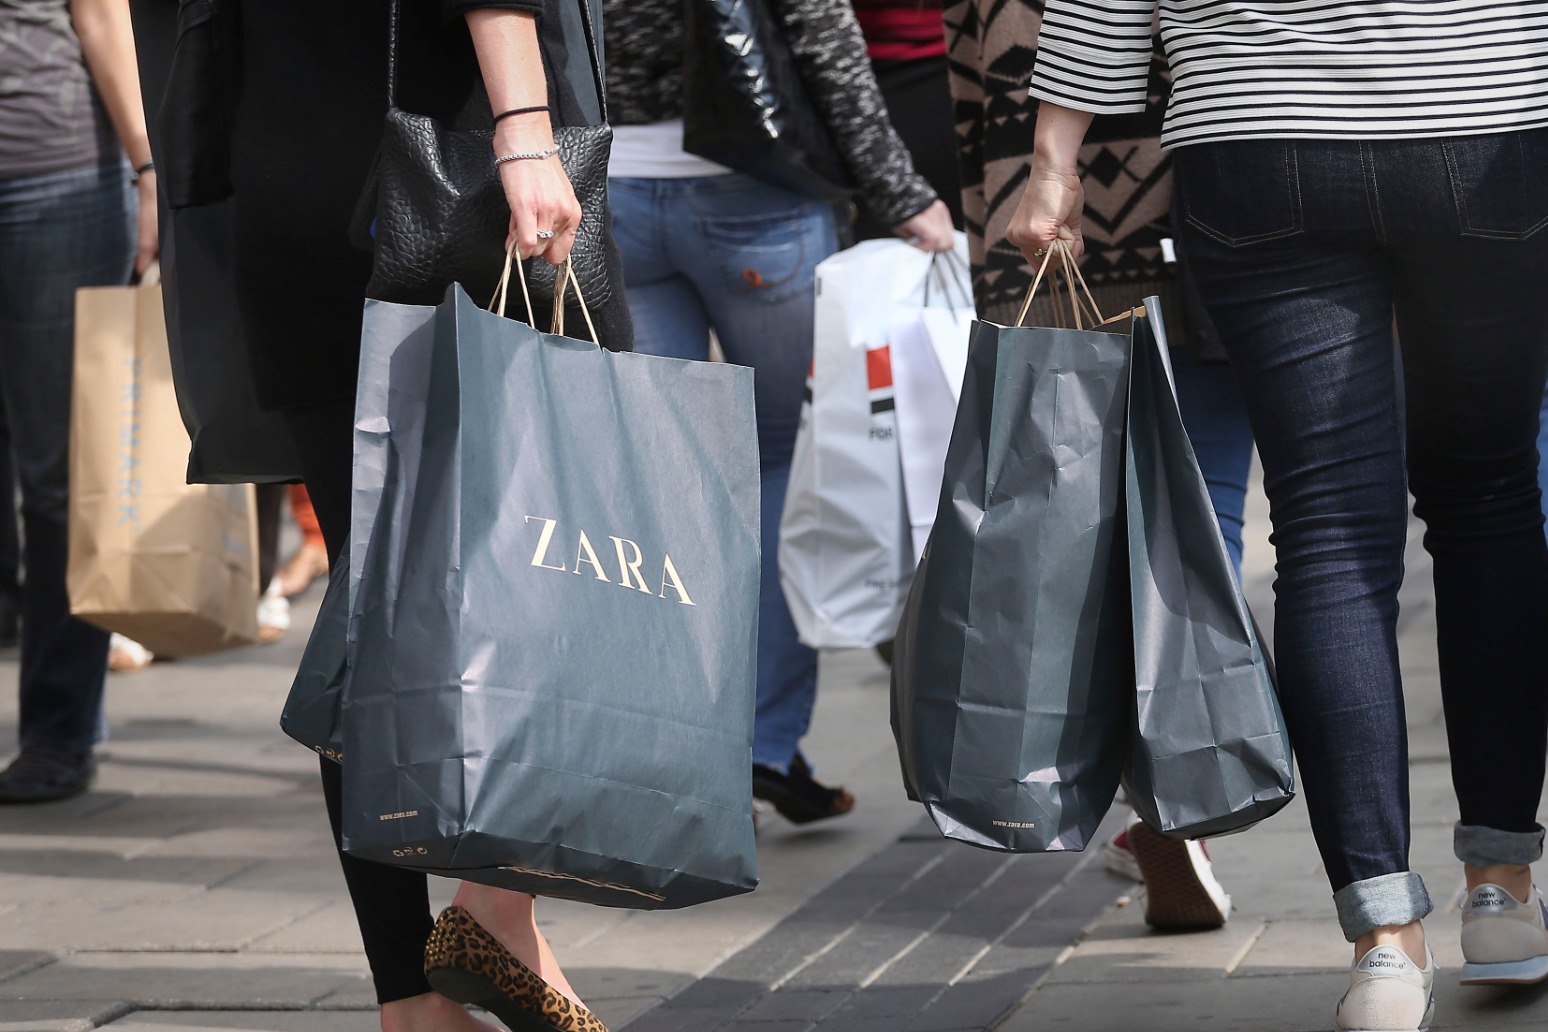 BIGGER DISCOUNTS FROM RETAILERS \'BOOSTED SHOPPER DEMAND FOR GOODS IN OCTOBER\' 